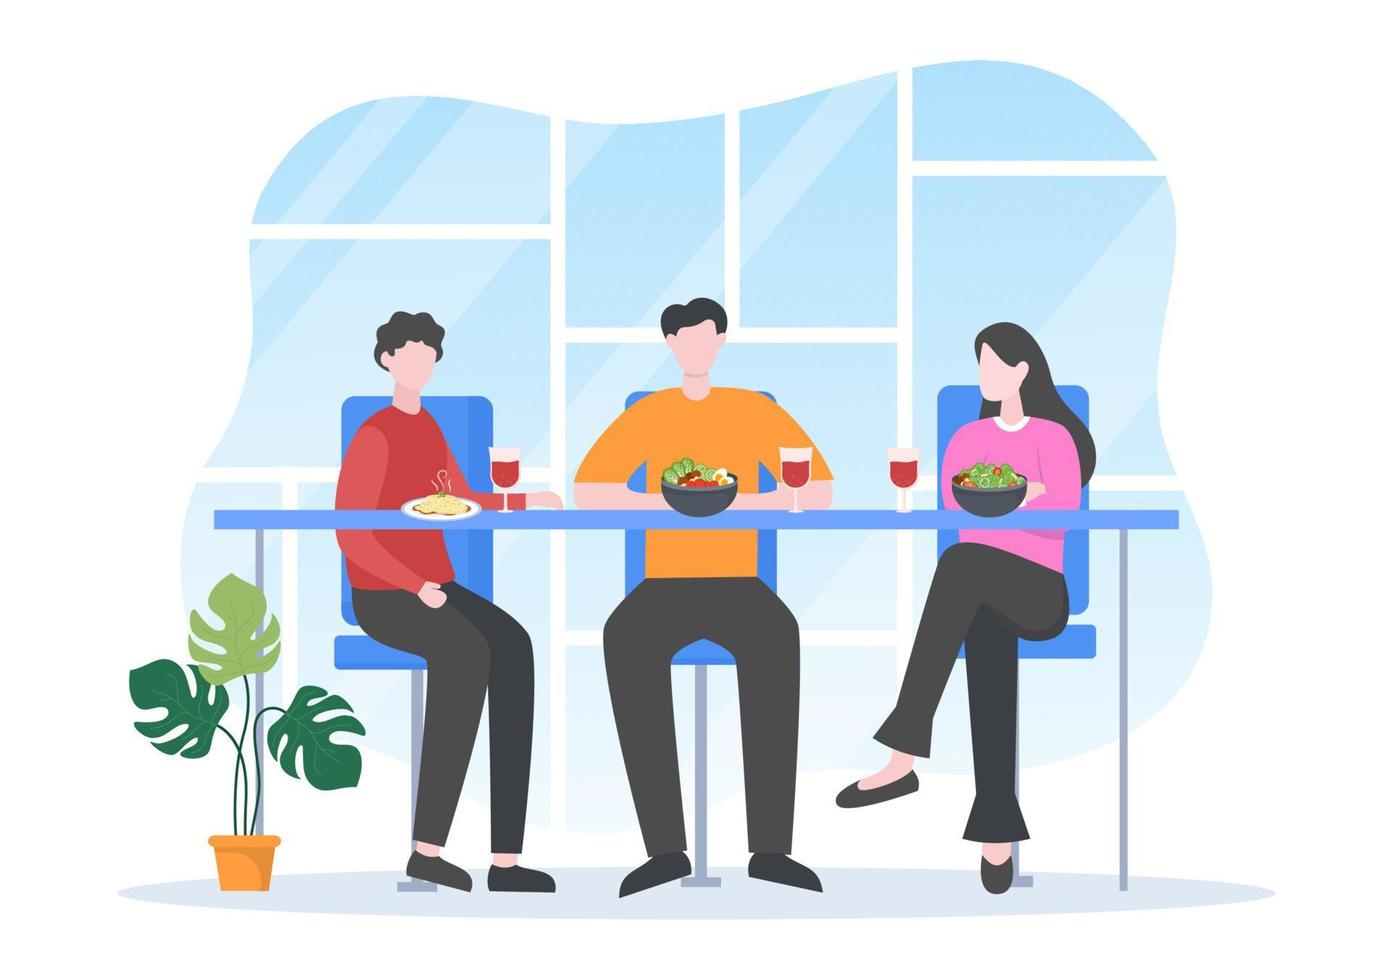 People Eating, Talking, Drinking and Working at Tables on Cafe or Restaurant in Flat Cartoon Illustration vector